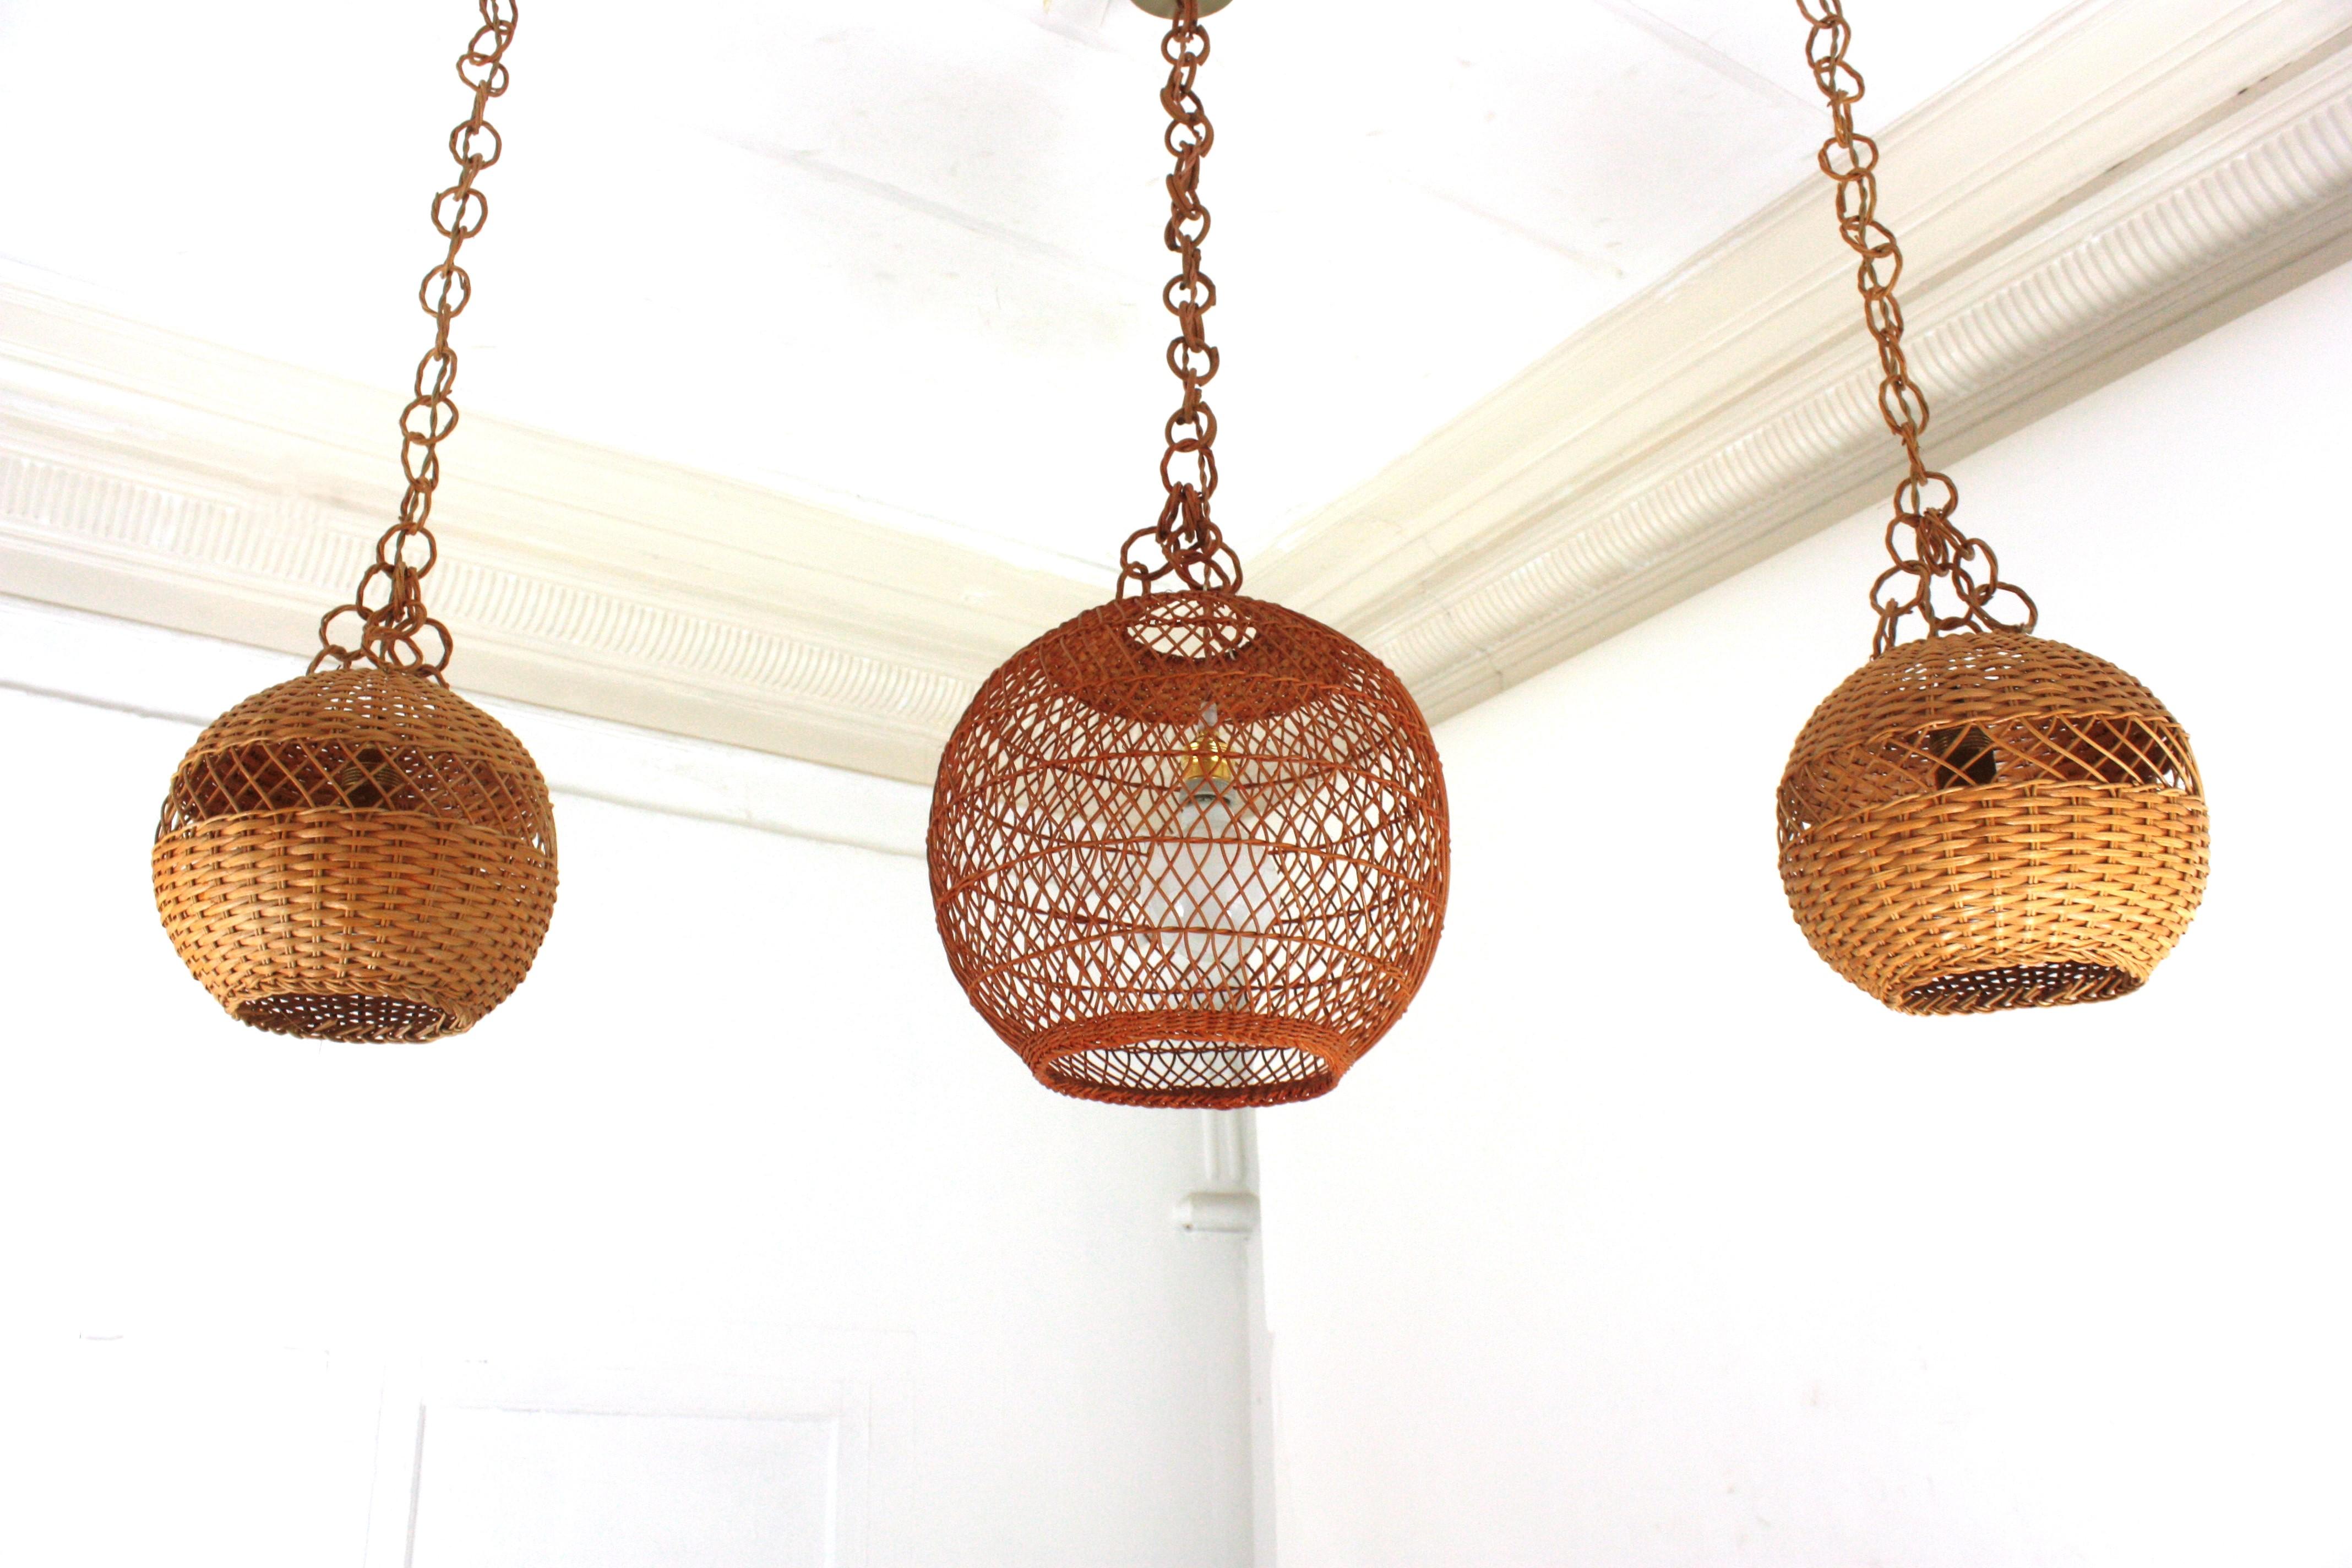 Pair of Handwoven Wicker Globe Pendant Lights or Lanterns For Sale 12